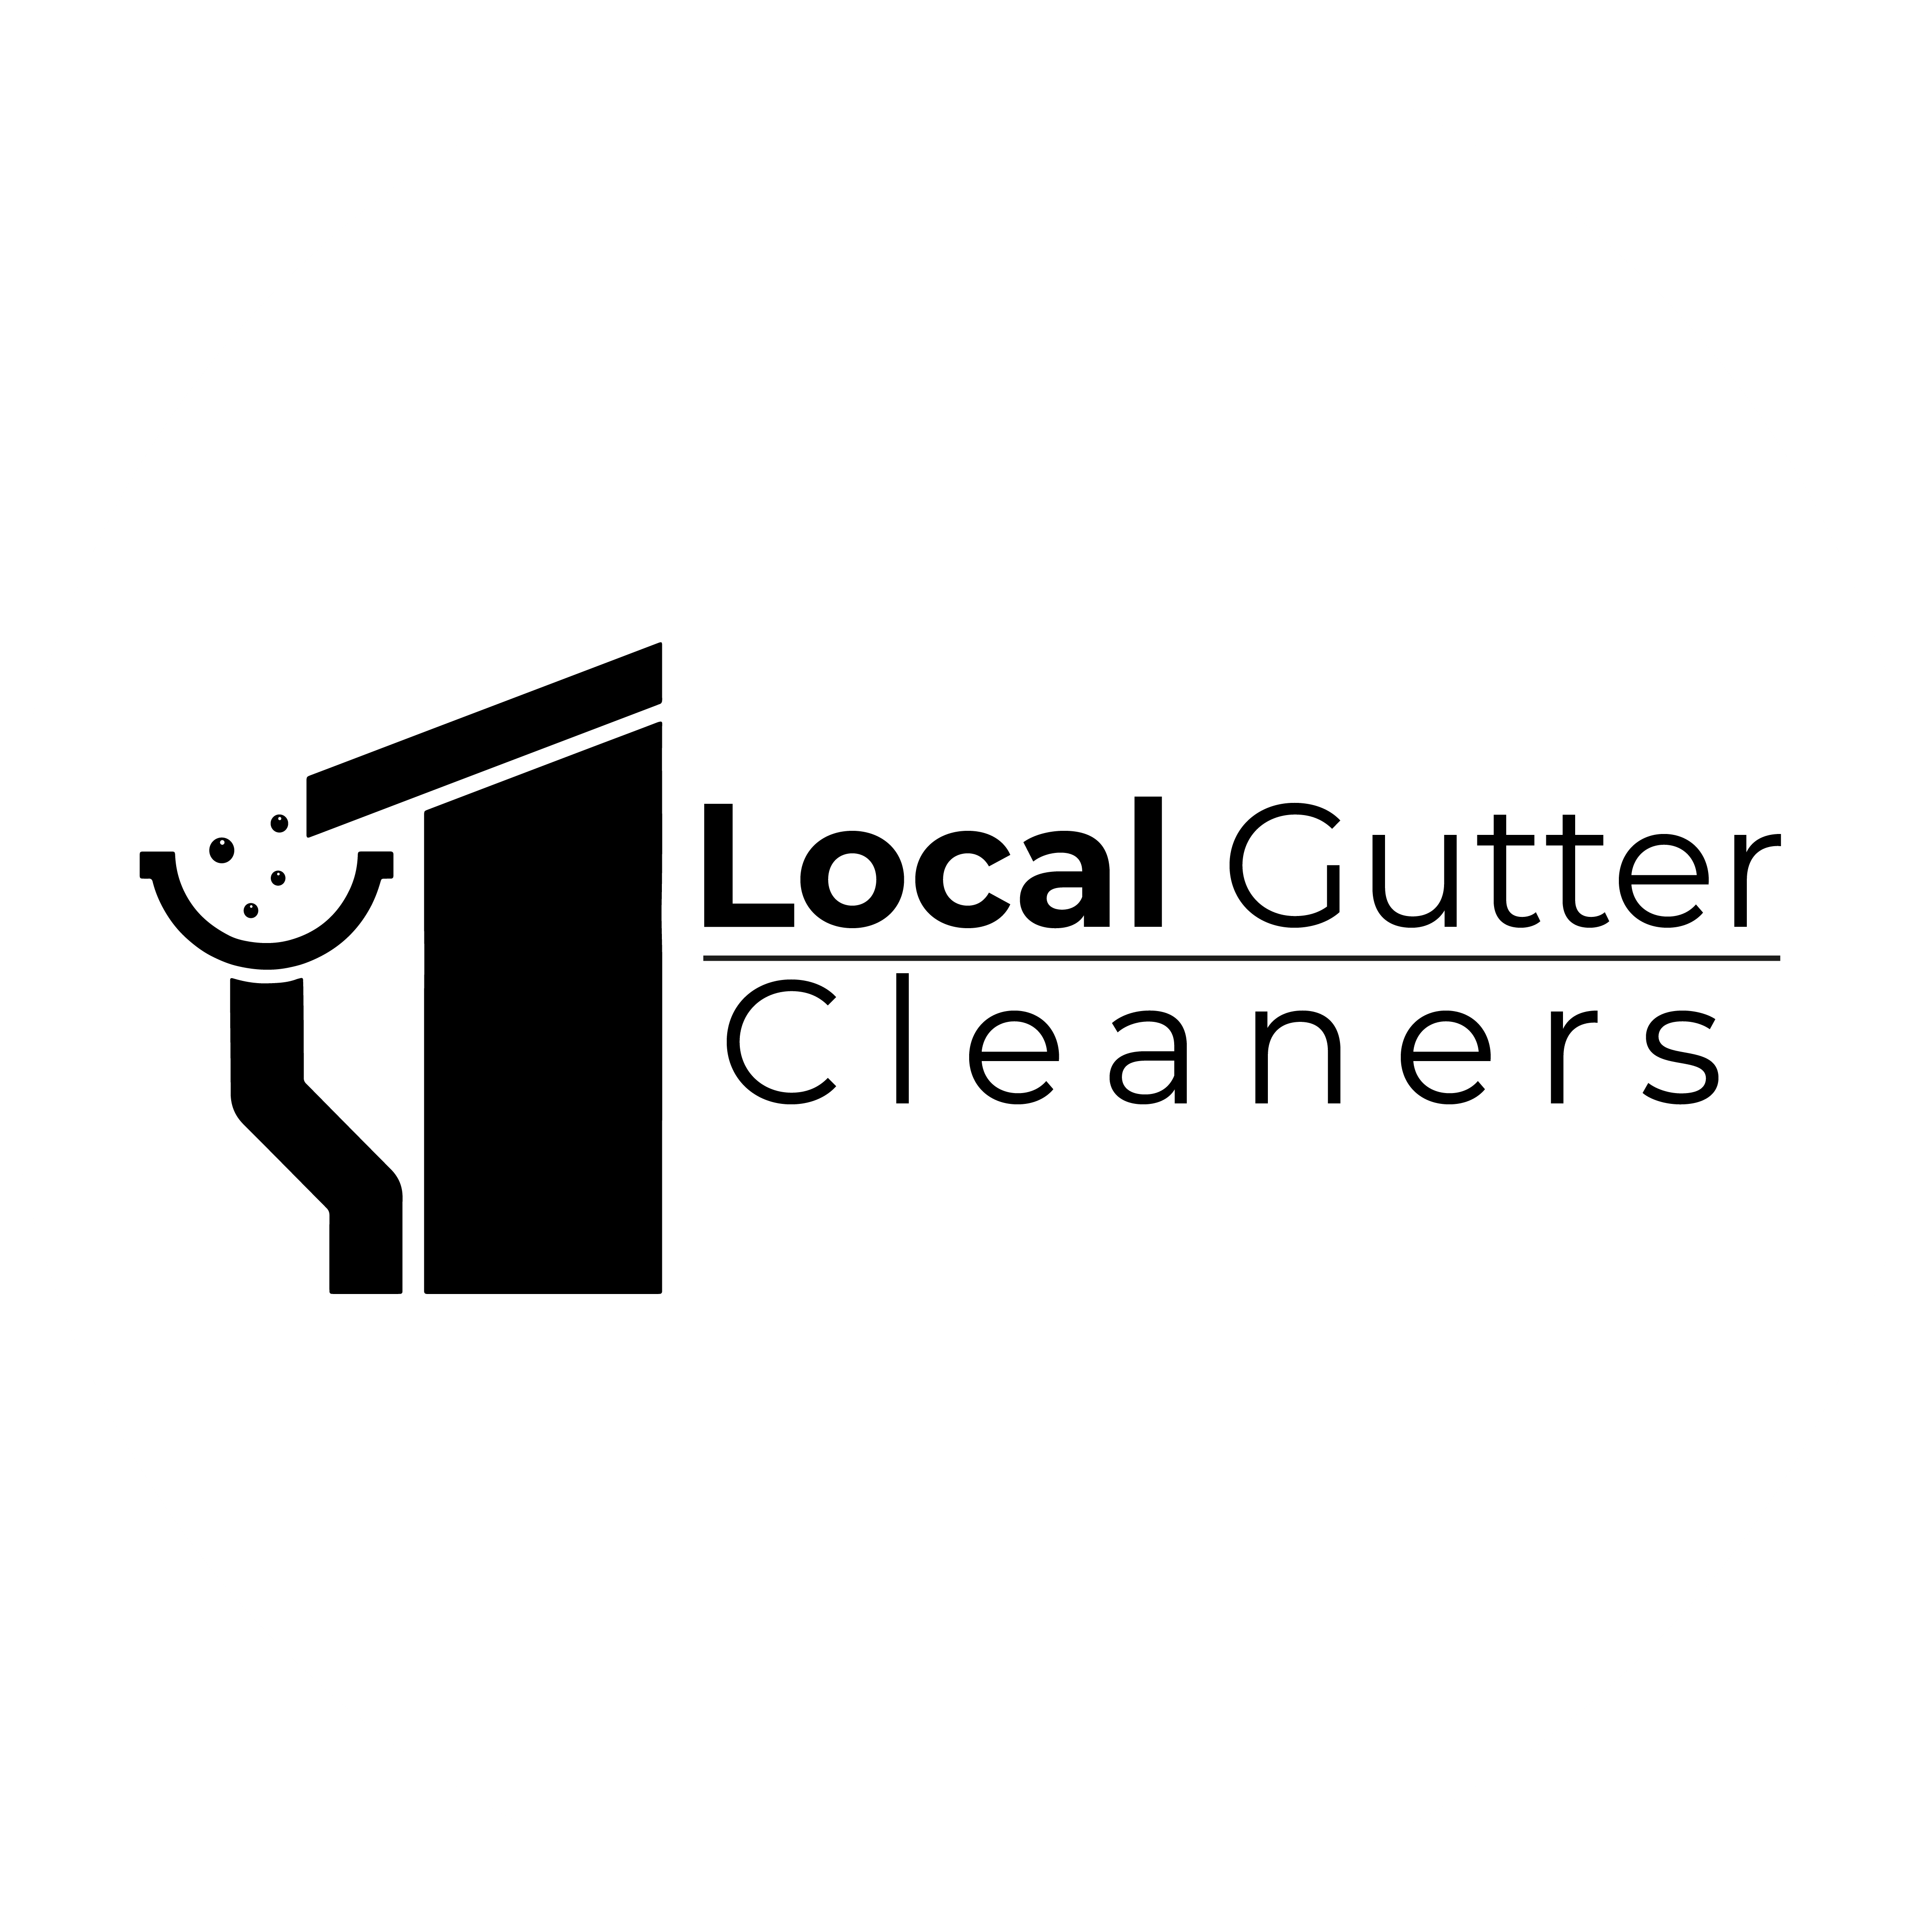 Local Gutter Cleaners Logo